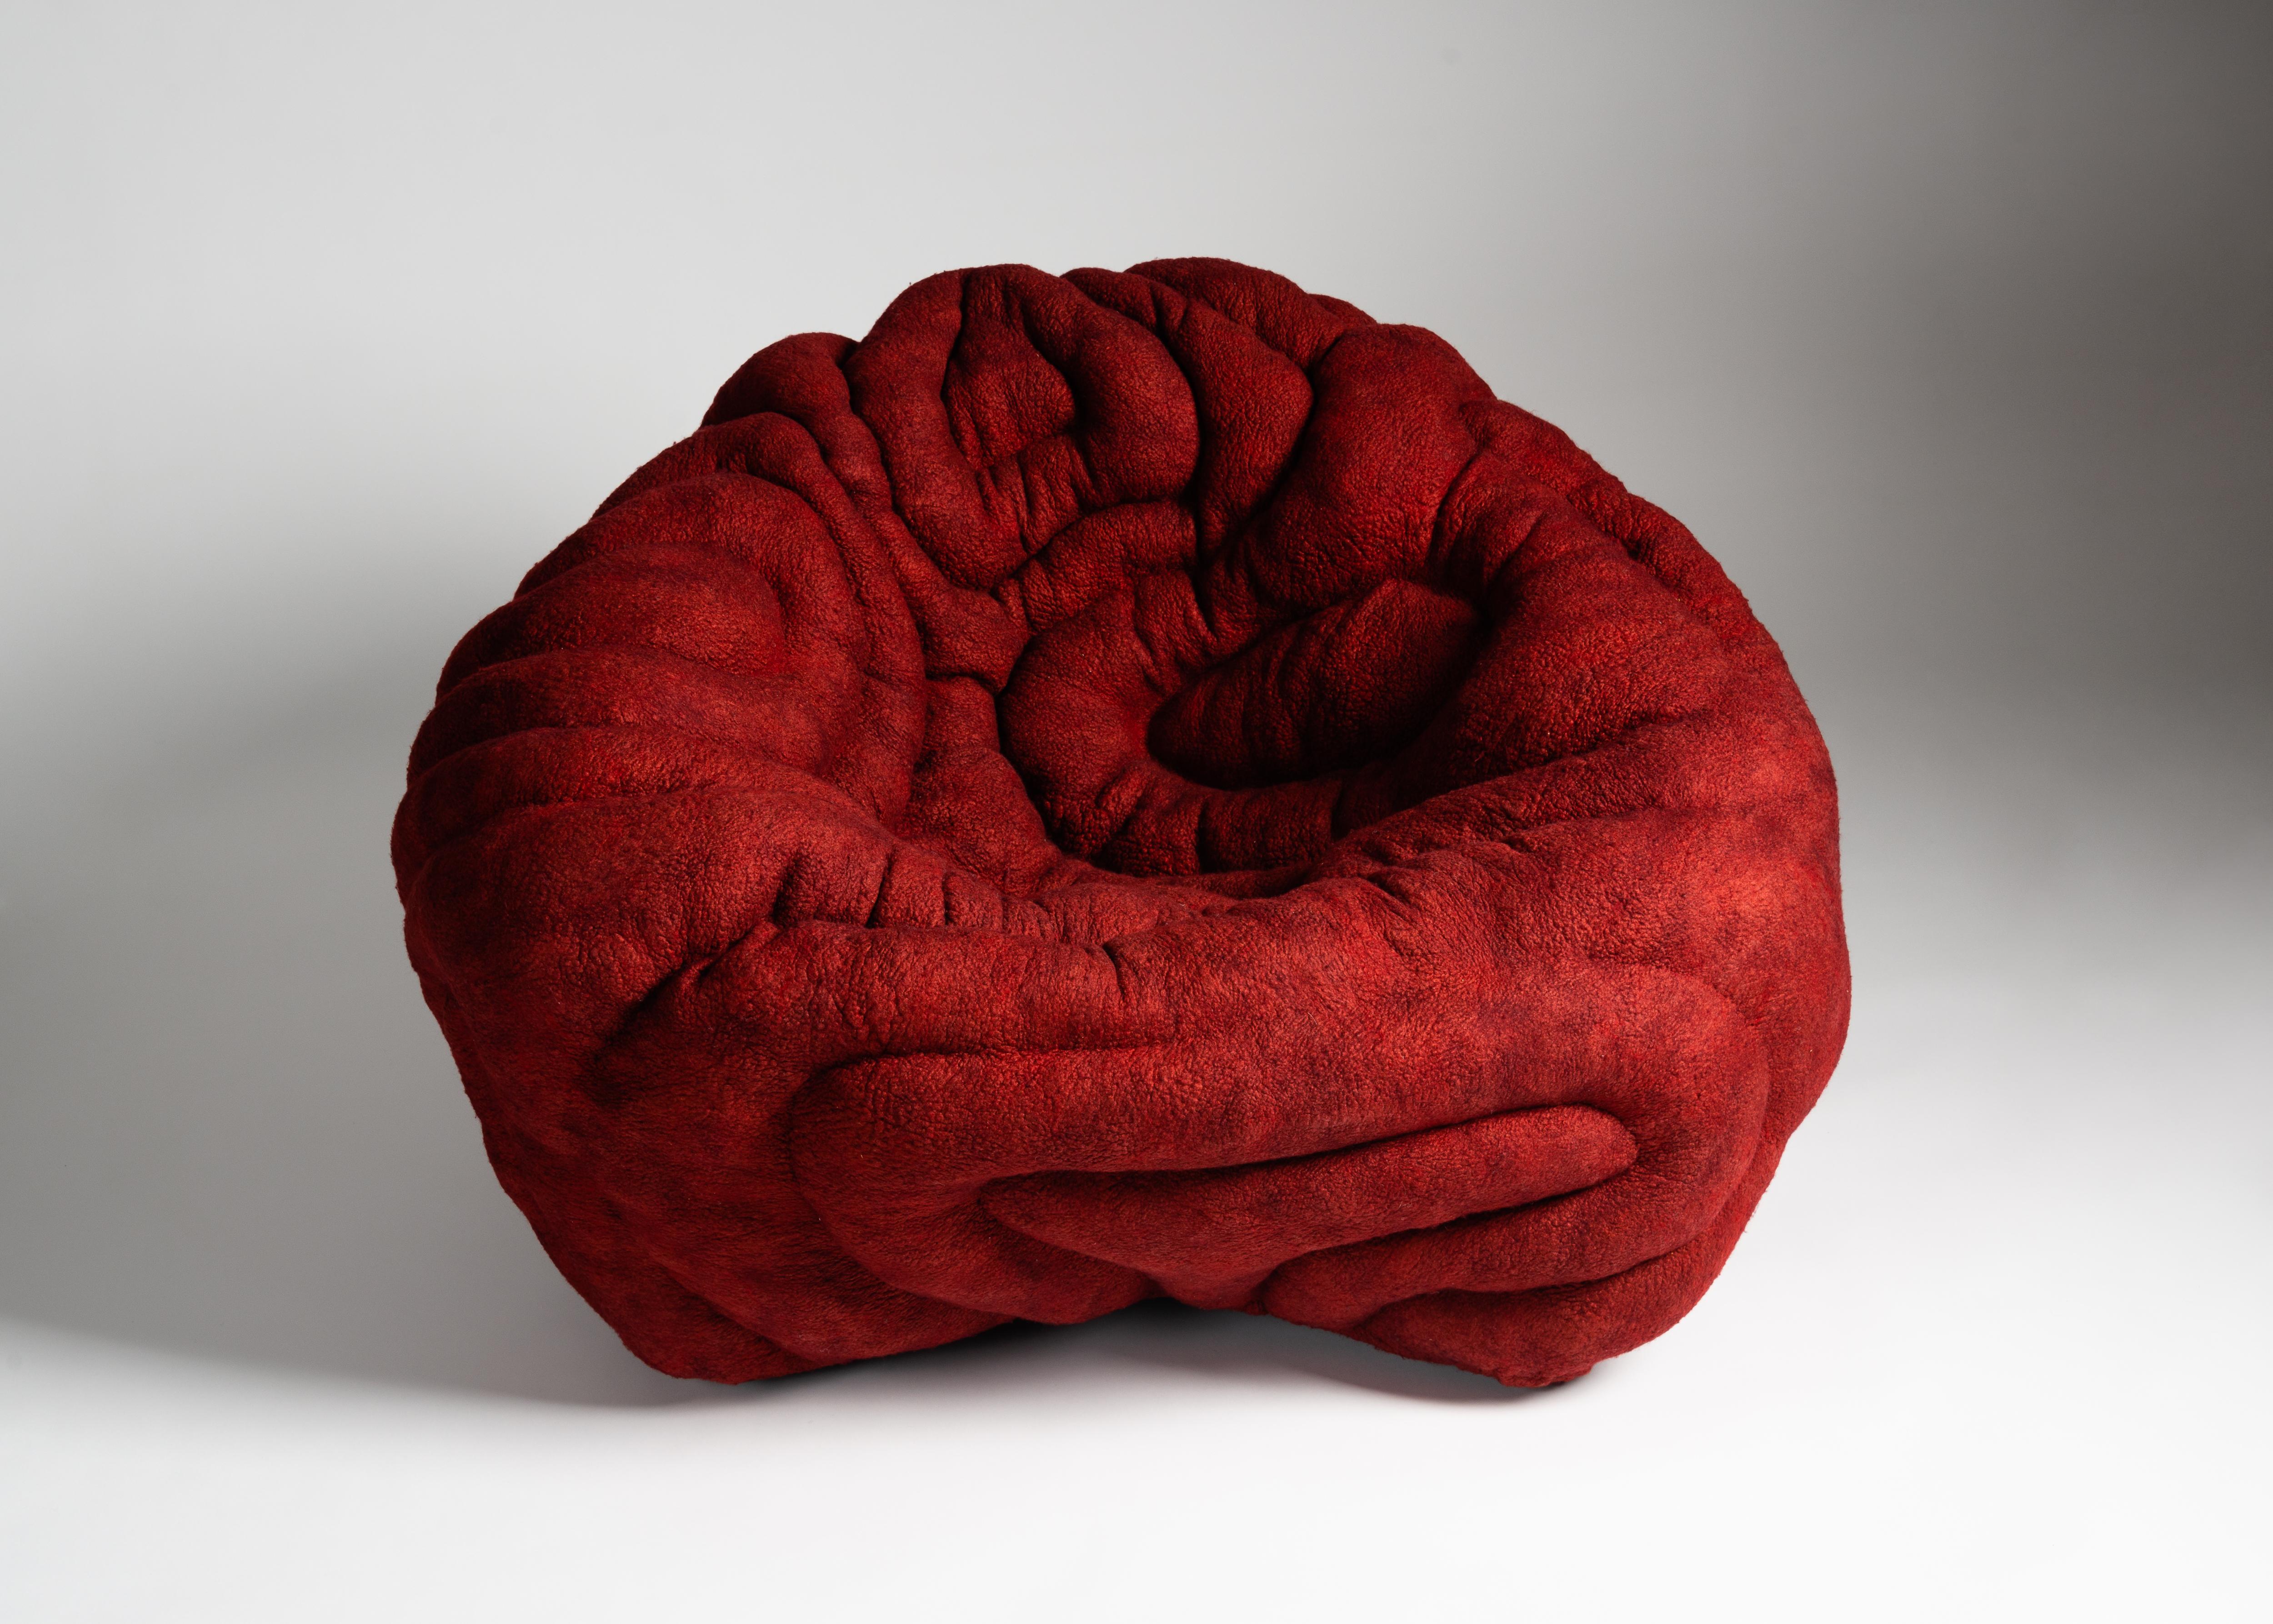 The upholstery of this chair is made of finely woven layers of felt and mimics forms in nature like seabed coral or crystalline rocks, which develop over years of growth or accretion. This new design by Ayala Serfaty is remarkable for its textured,